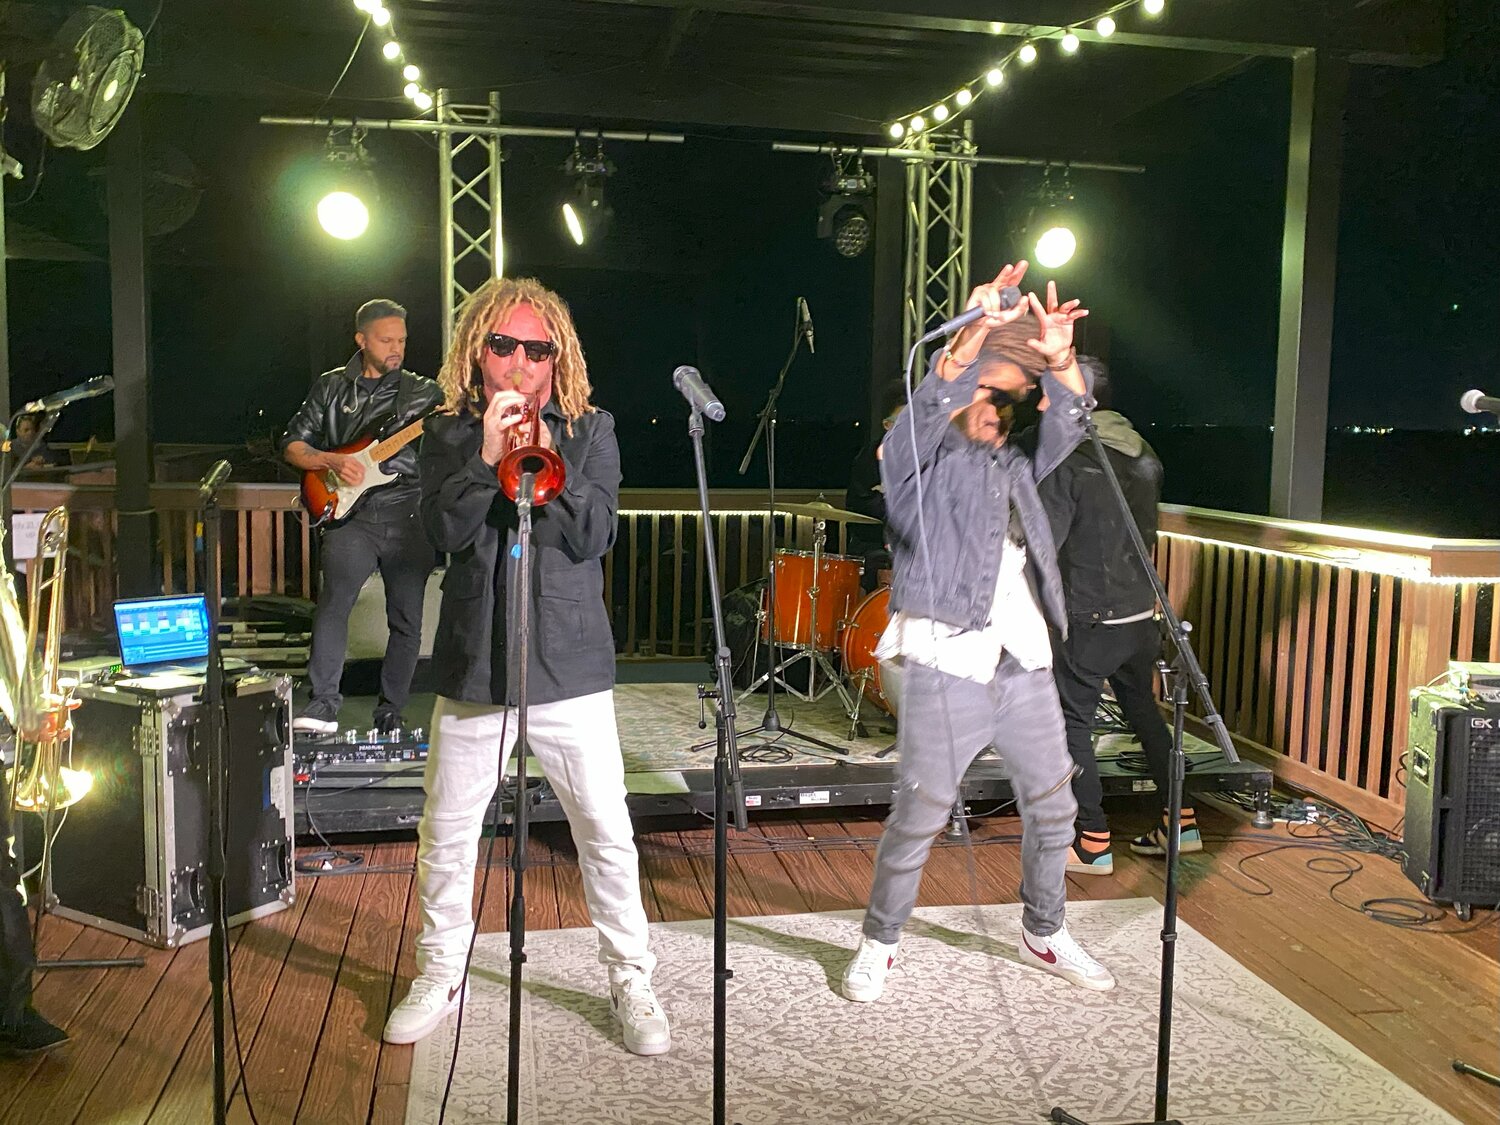 Miami-based band Xperimento provided entertainment all night long and got the crowd dancing.